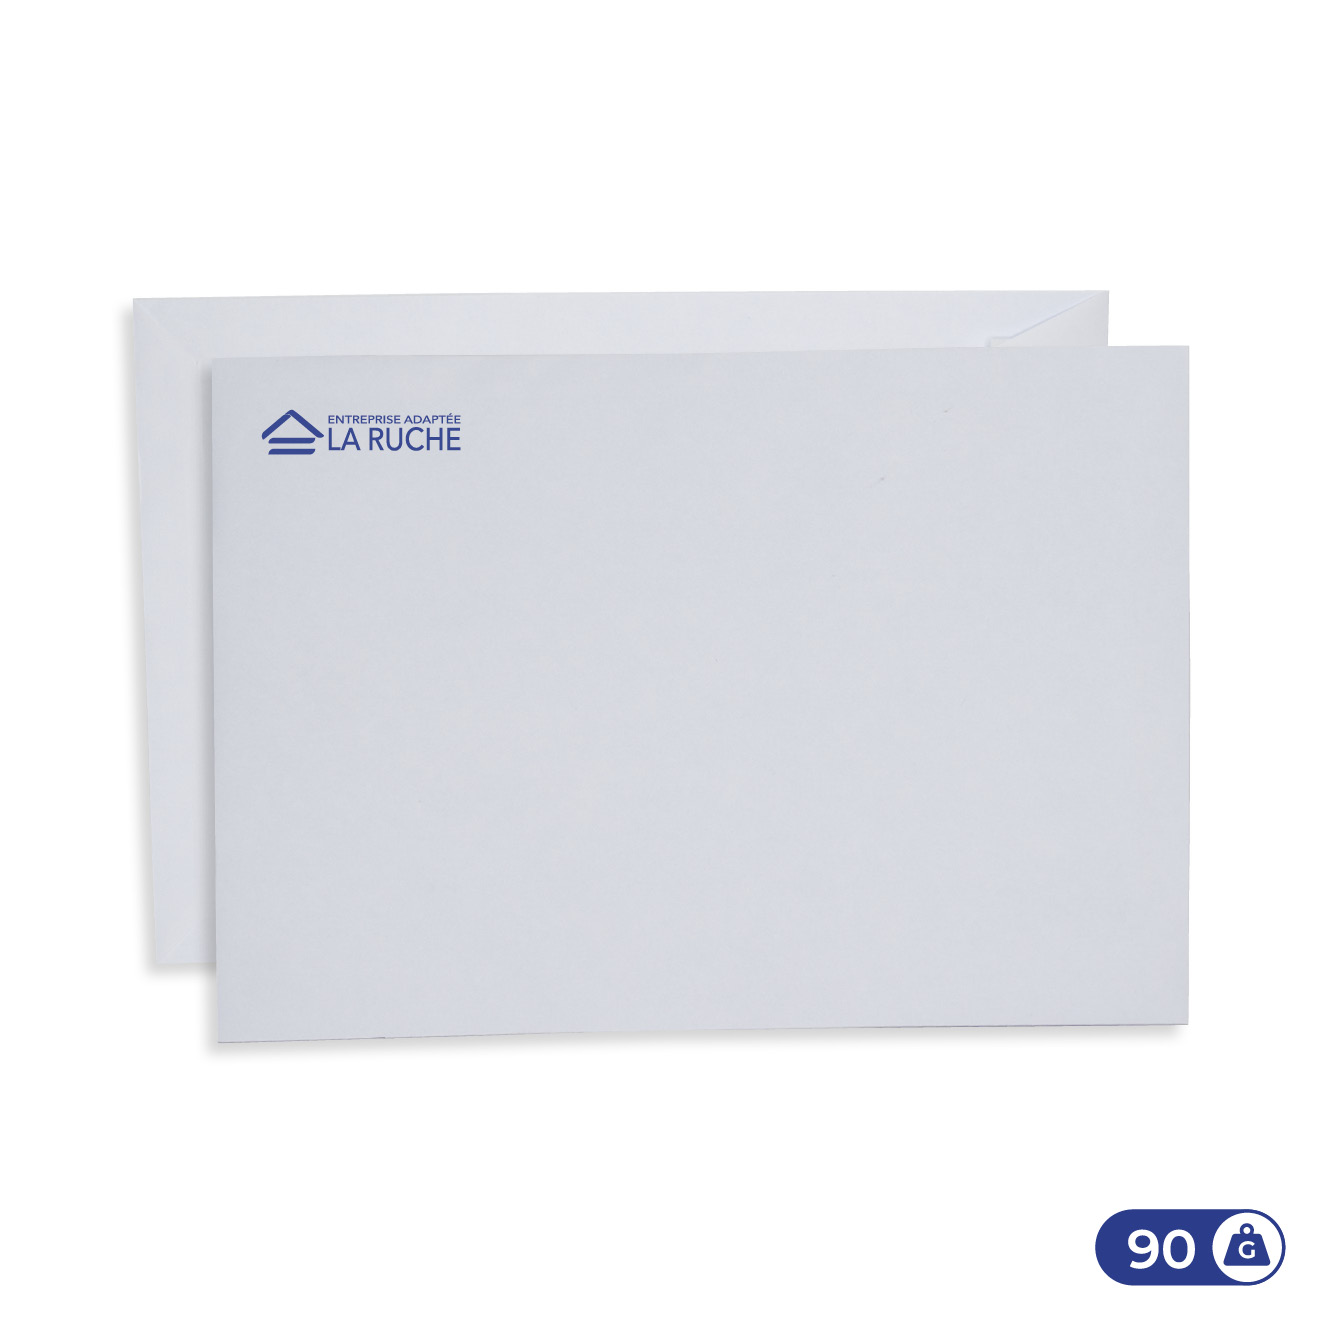 Enveloppes blanches personnalisables 229×324 mm – 90g